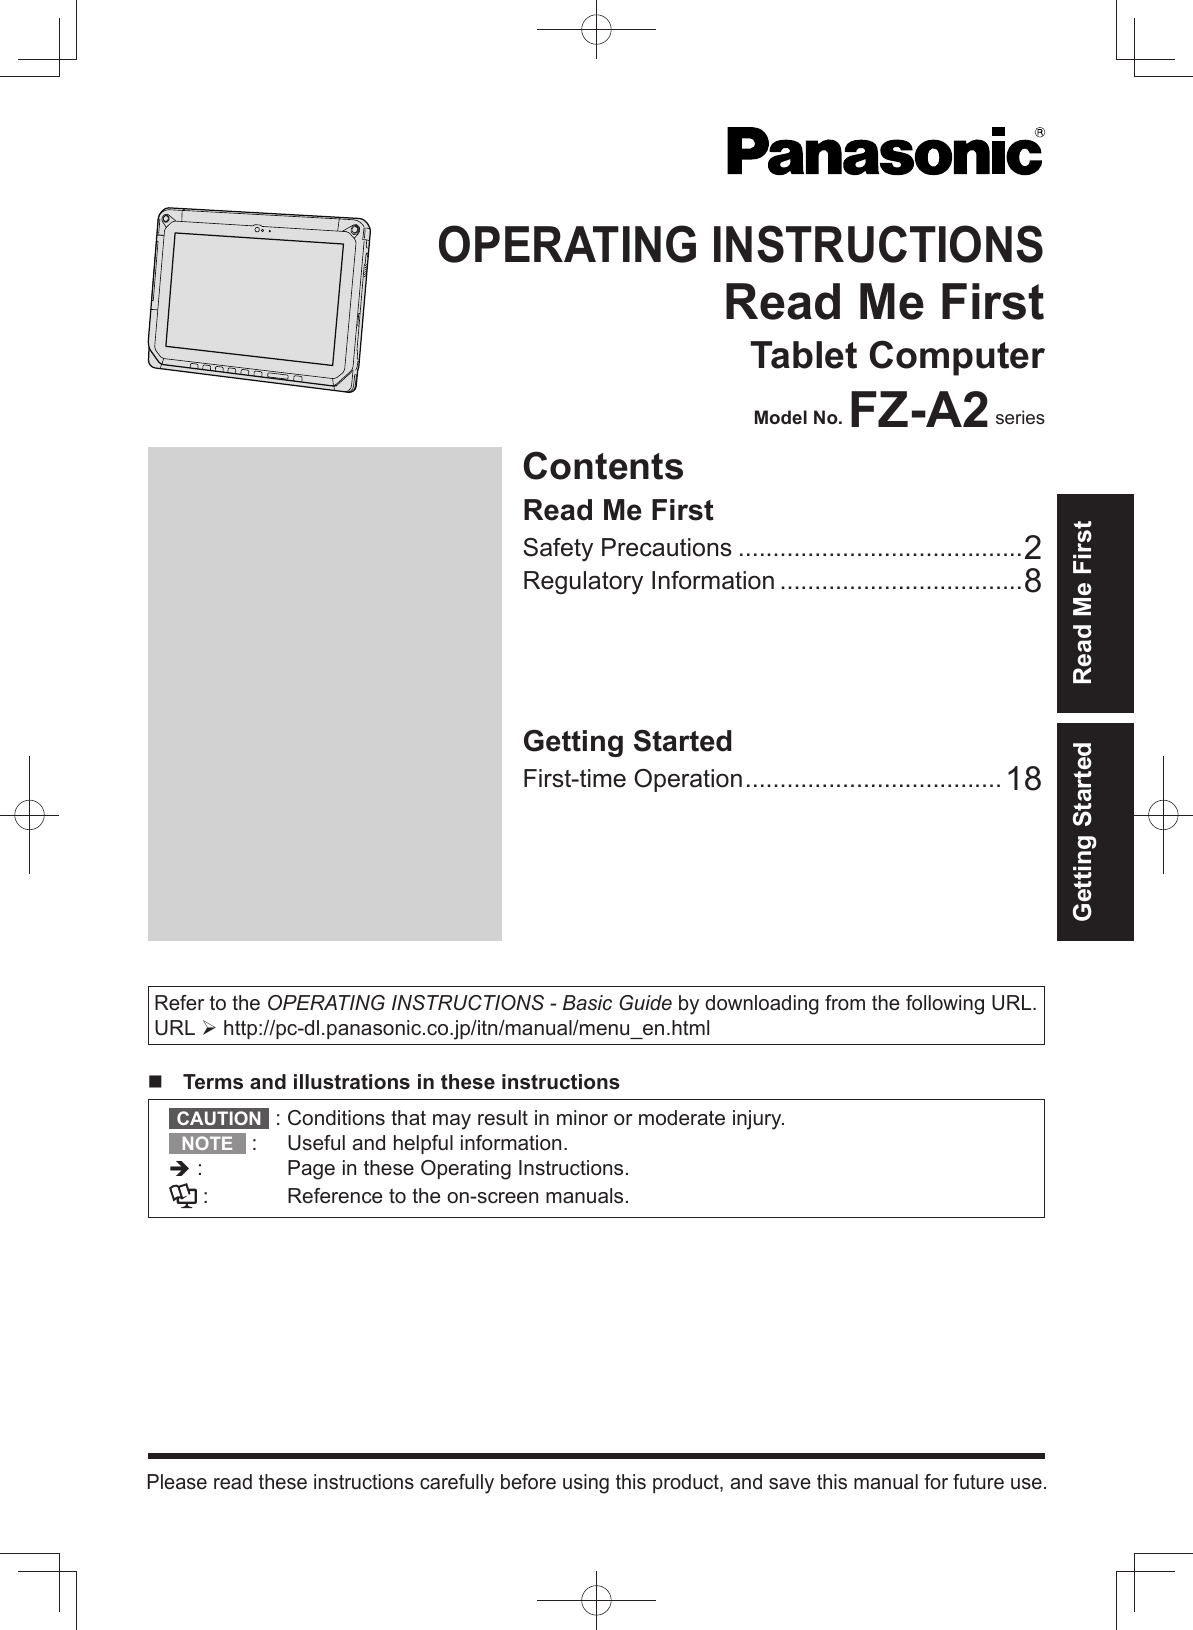 Refer to the OPERATING INSTRUCTIONS - Basic Guide by downloading from the following URL.URL  http://pc-dl.panasonic.co.jp/itn/manual/menu_en.html  Terms and illustrations in these instructionsCAUTION  :  Conditions that may result in minor or moderate injury.NOTE  :  Useful and helpful information. :   Page in these Operating Instructions. :  Reference to the on-screen manuals.ContentsOPERATING INSTRUCTIONSRead Me FirstTablet ComputerModel No. FZ-A2 seriesPlease read these instructions carefully before using this product, and save this manual for future use.Getting Started Read Me FirstGetting StartedFirst-time Operation .....................................18Read Me FirstSafety Precautions .........................................2Regulatory Information ...................................8